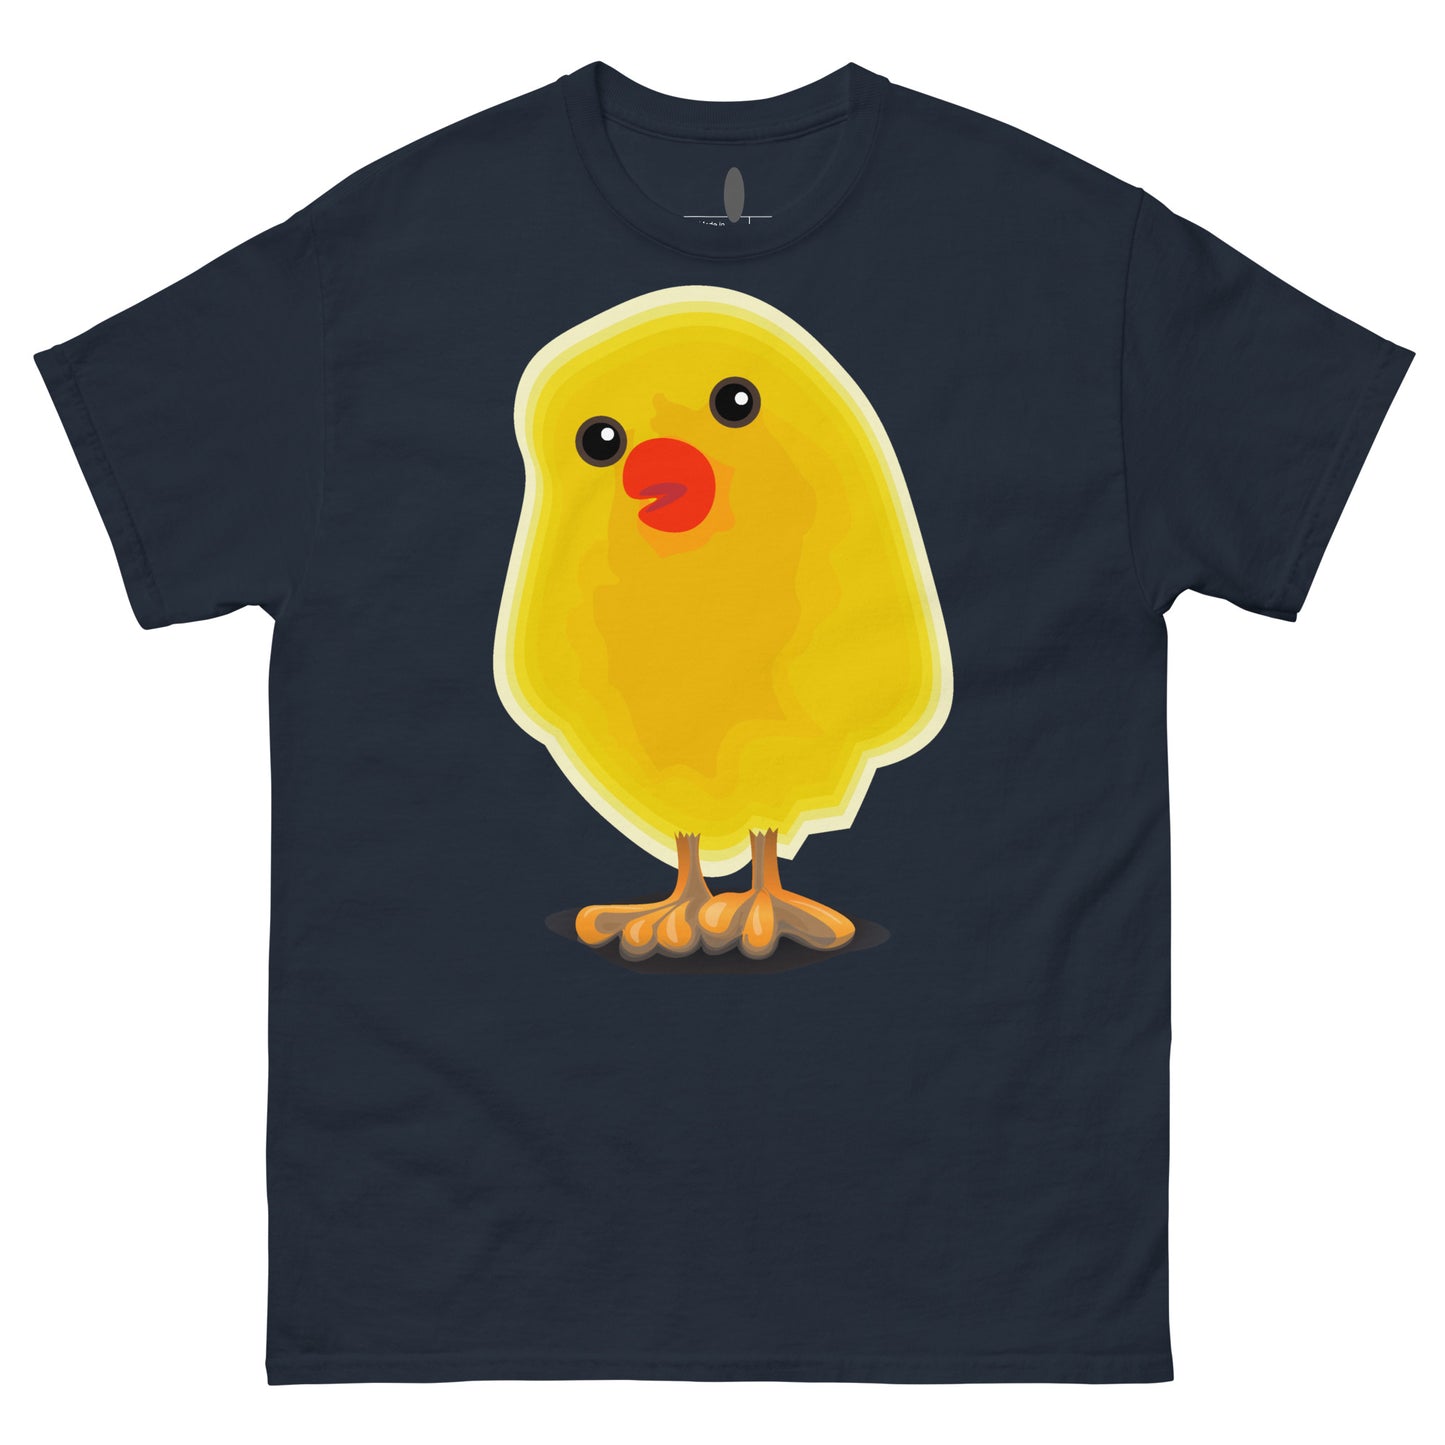 CHICKIN by DOLVING - Men's classic tee